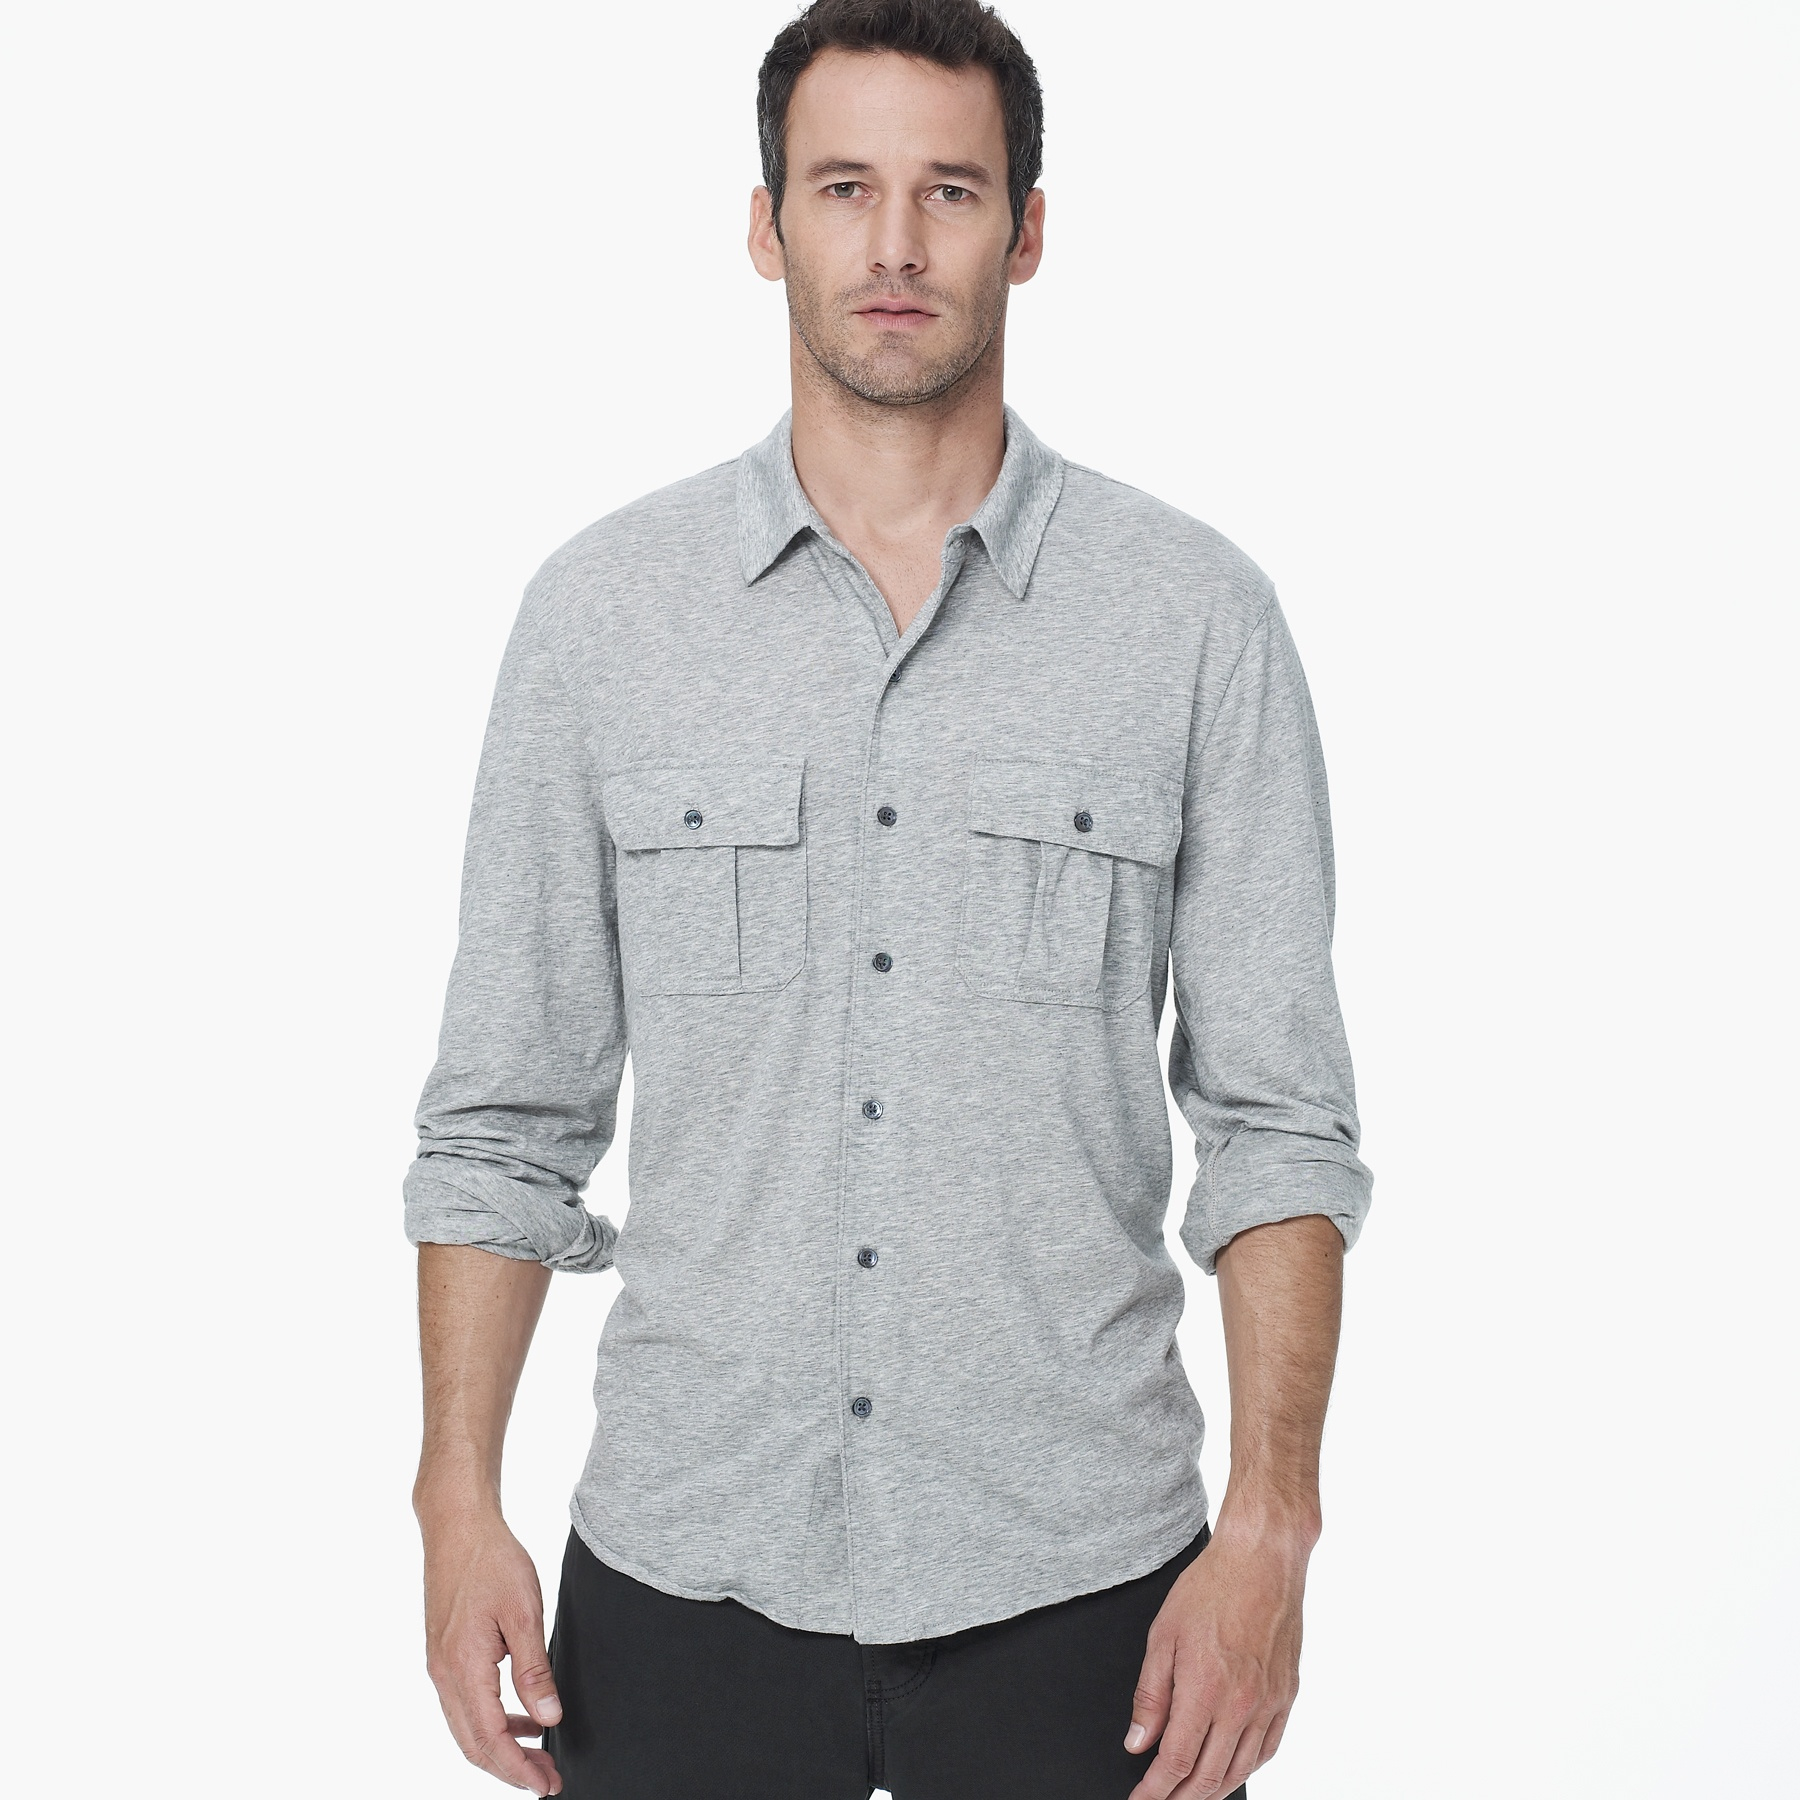 Lyst - James perse Melange Jersey Button Down in Gray for Men